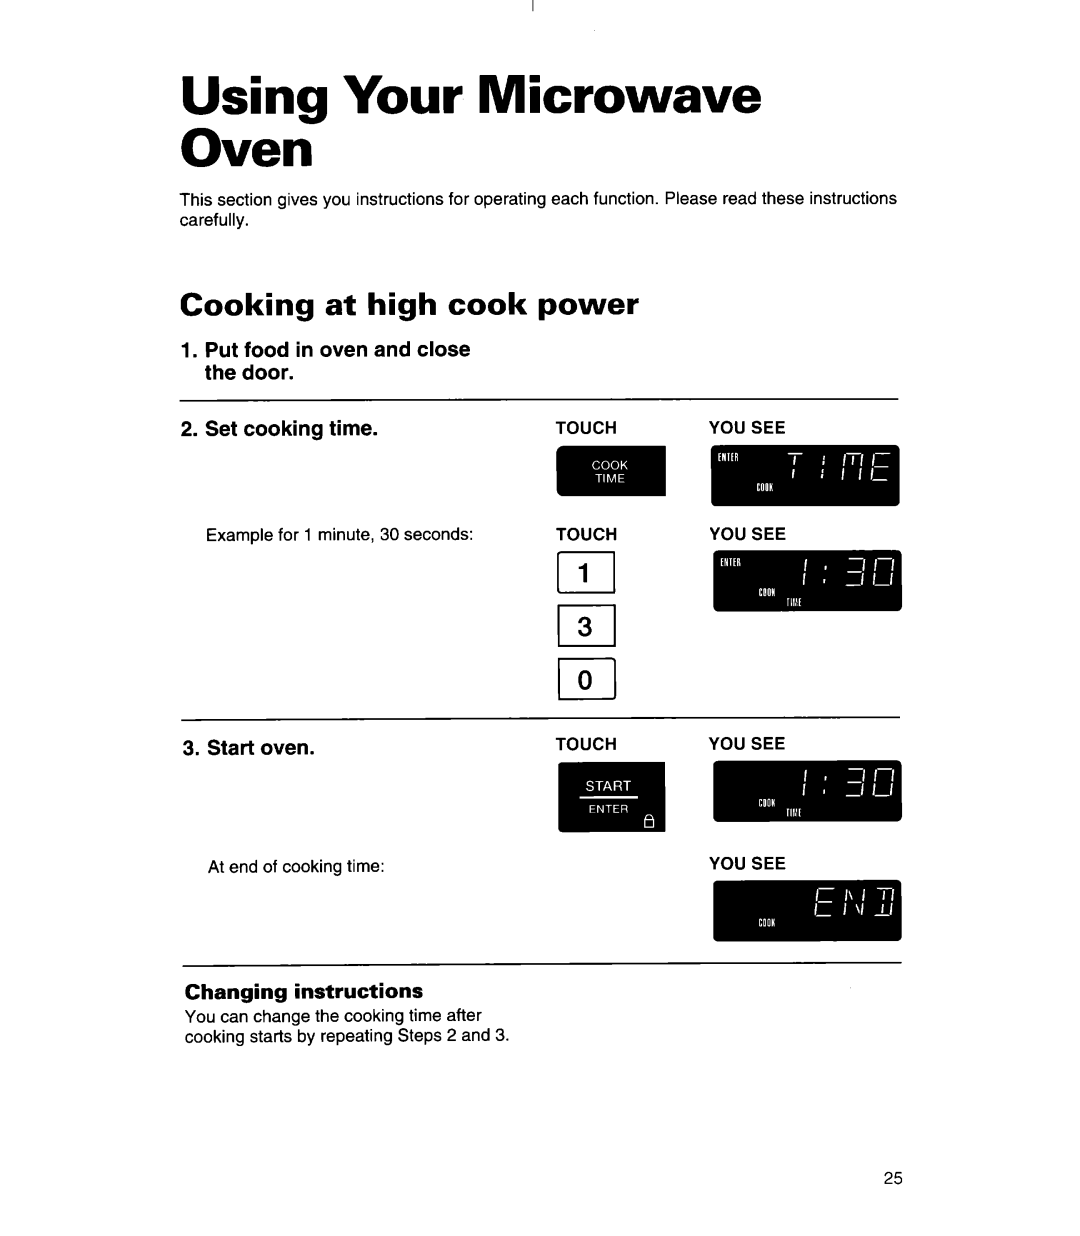 Whirlpool MH7130XE Using Your Microwave Oven, Cooking at high cook power, r-l3, Put food in oven and close the door 